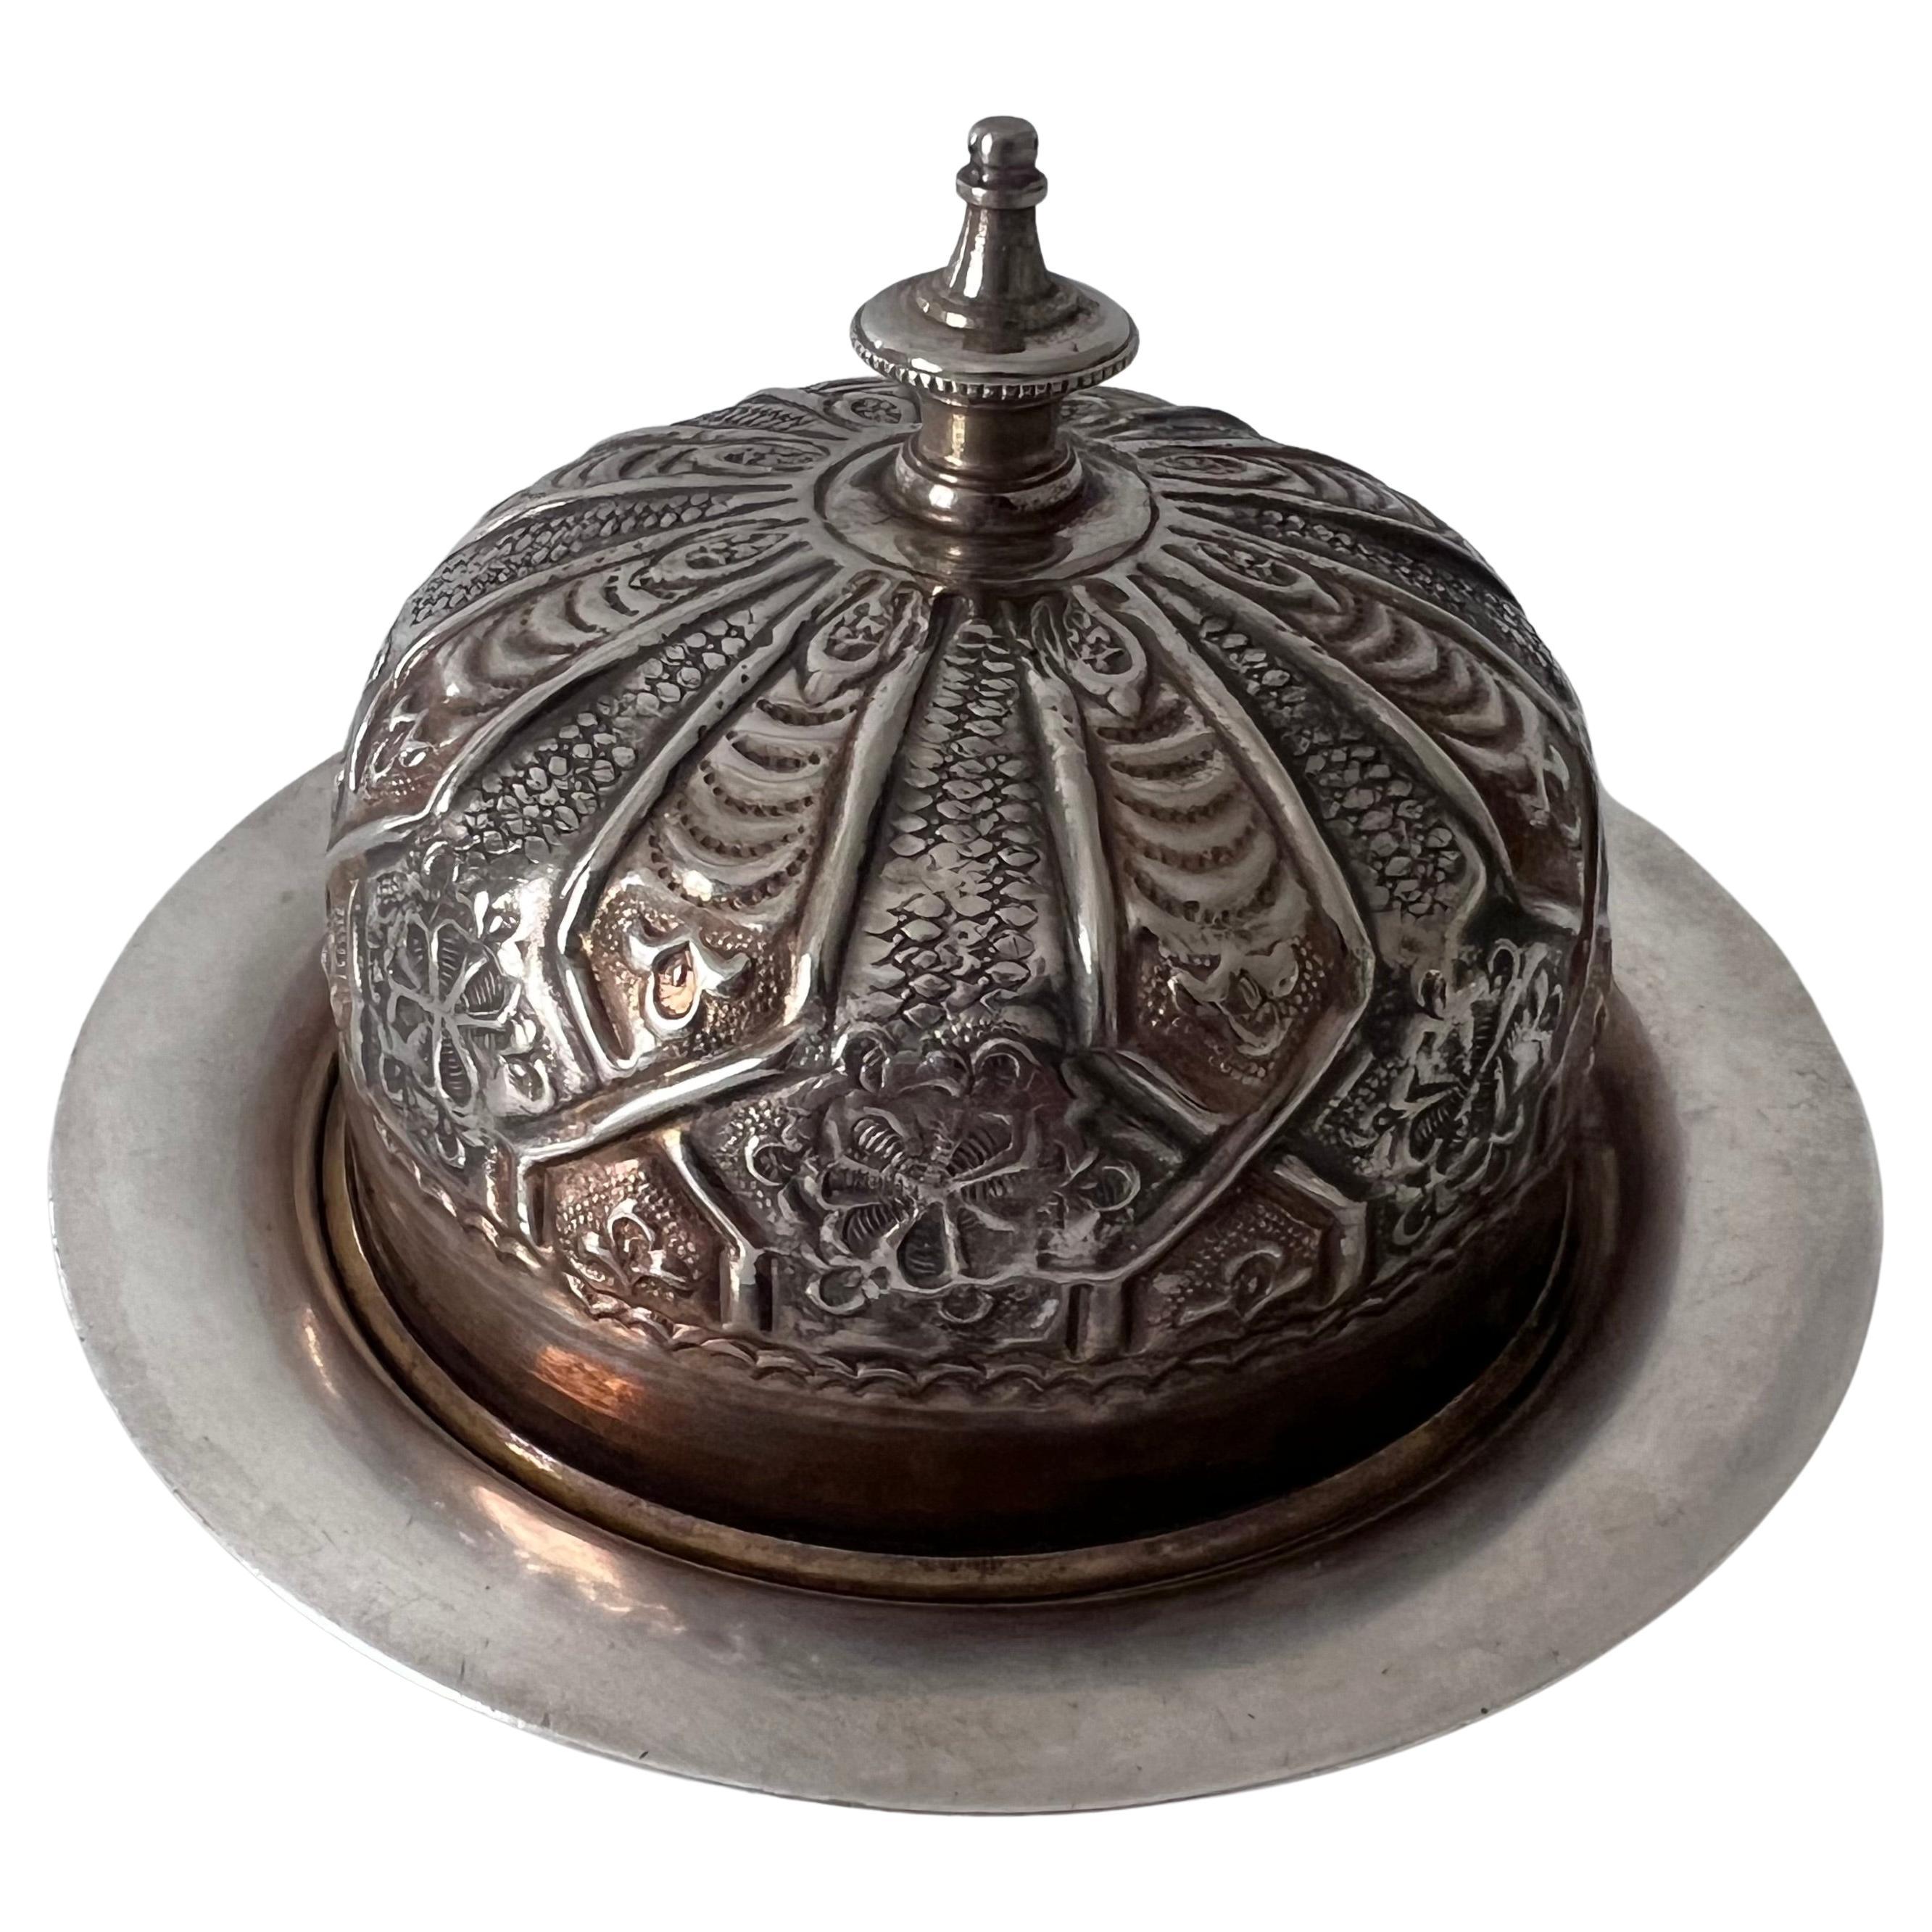 Acquired in Paris France, a Repoussé Domed plate.  A great piece for butter, or condiments, and also works nicely for everything from 420 to desk supplies, like paper clips, rubber bands or pate.

a compliment to any bar, desk or work station.